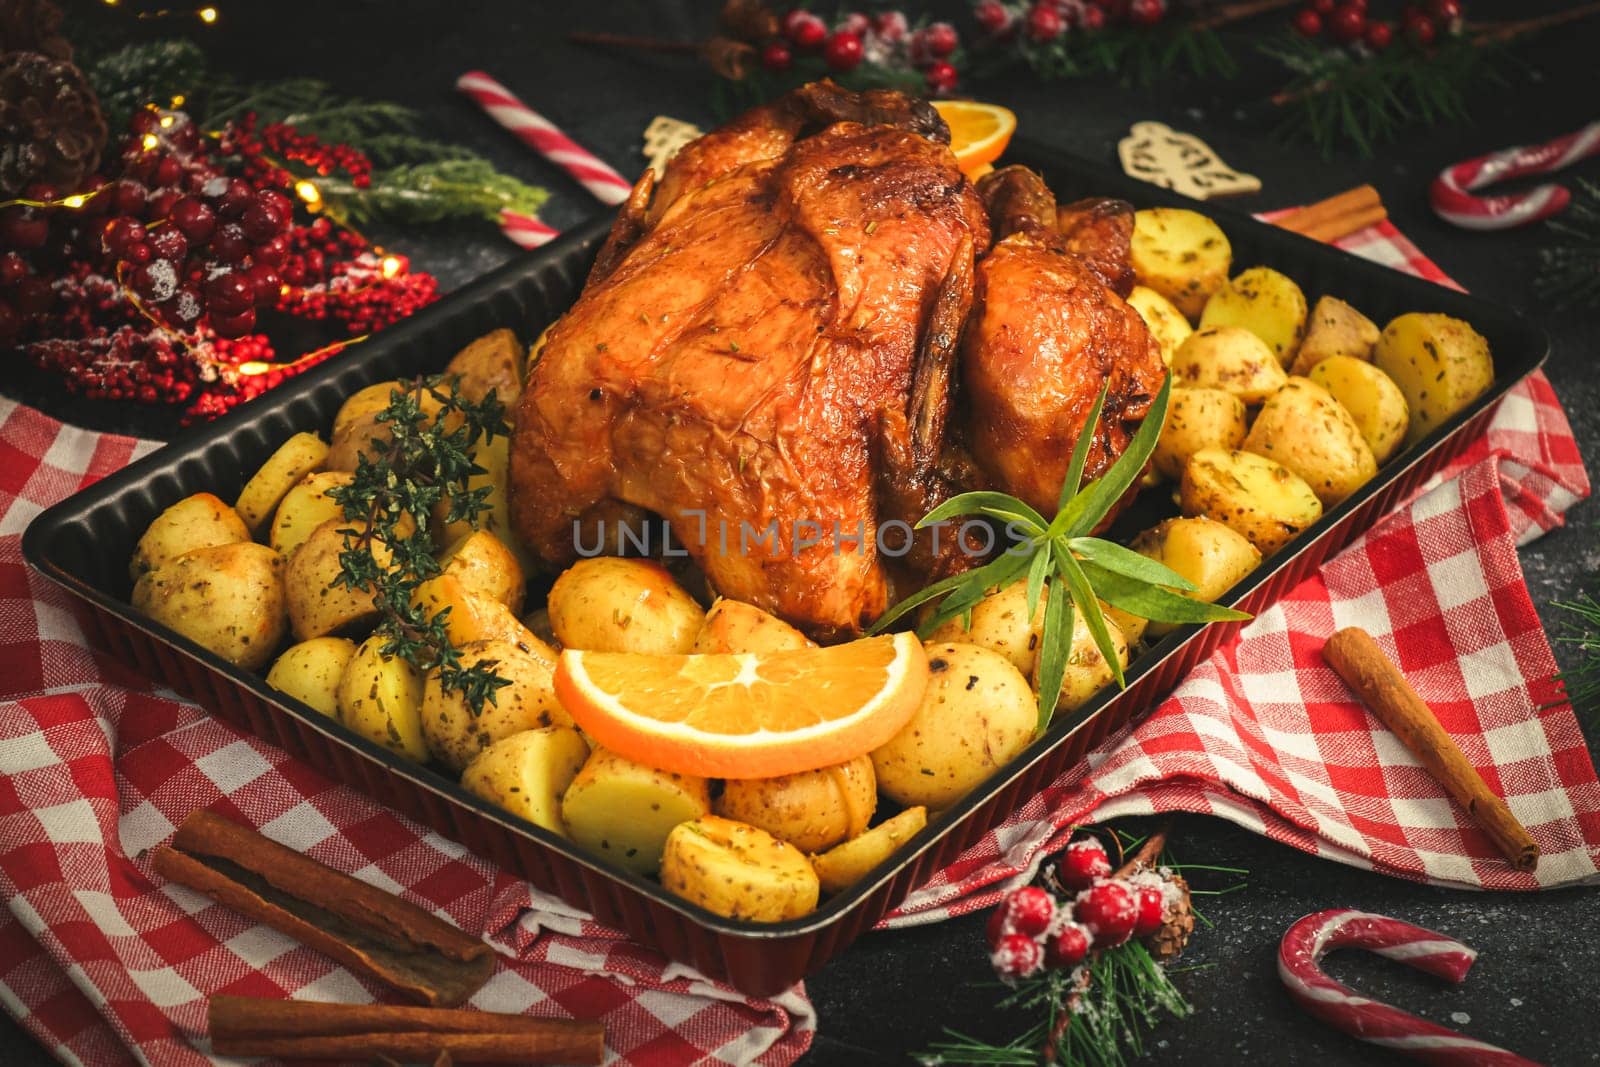 Chicken with potatoes, herbs, orange, cinnamon sticks and candy lollipops in a baking dish and christmas decoration on a black background, close-up side view.